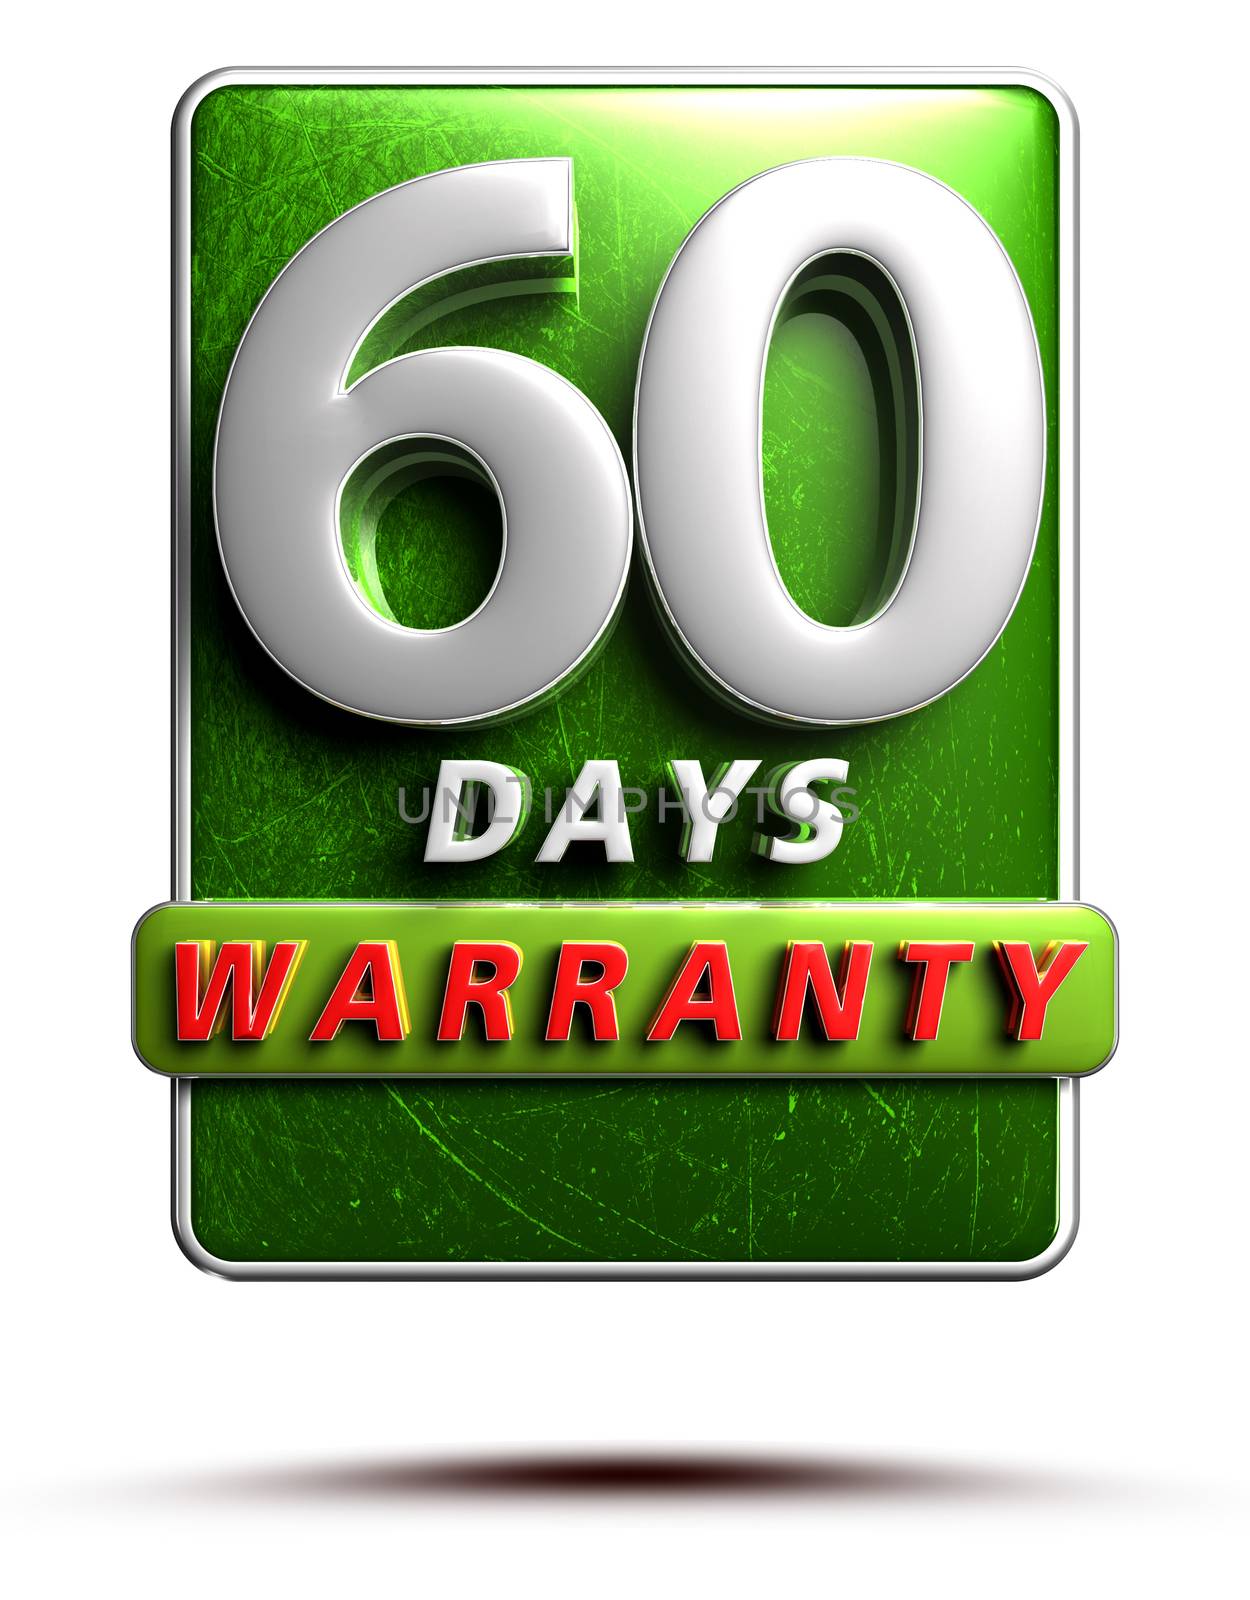 Warranty label 3D illustration 60 days green Color Numbers in stainless steel Isolated on a white background. (With Clipping Path).